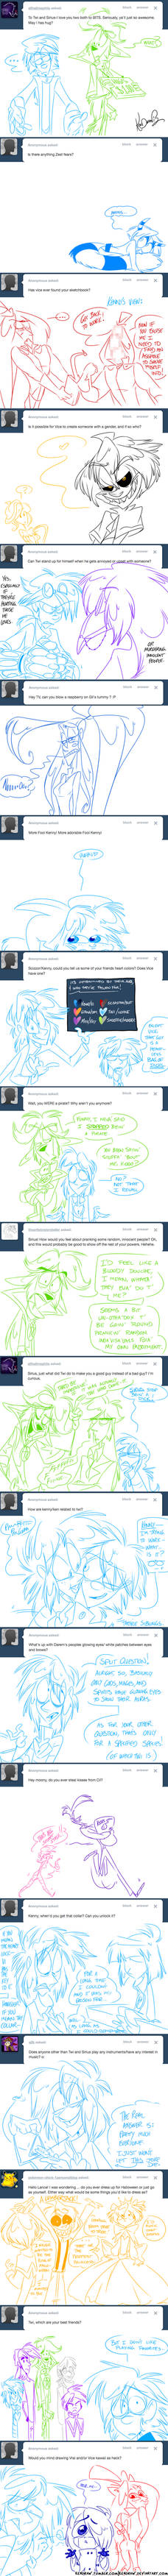 12282012 Tumblr asks and answers